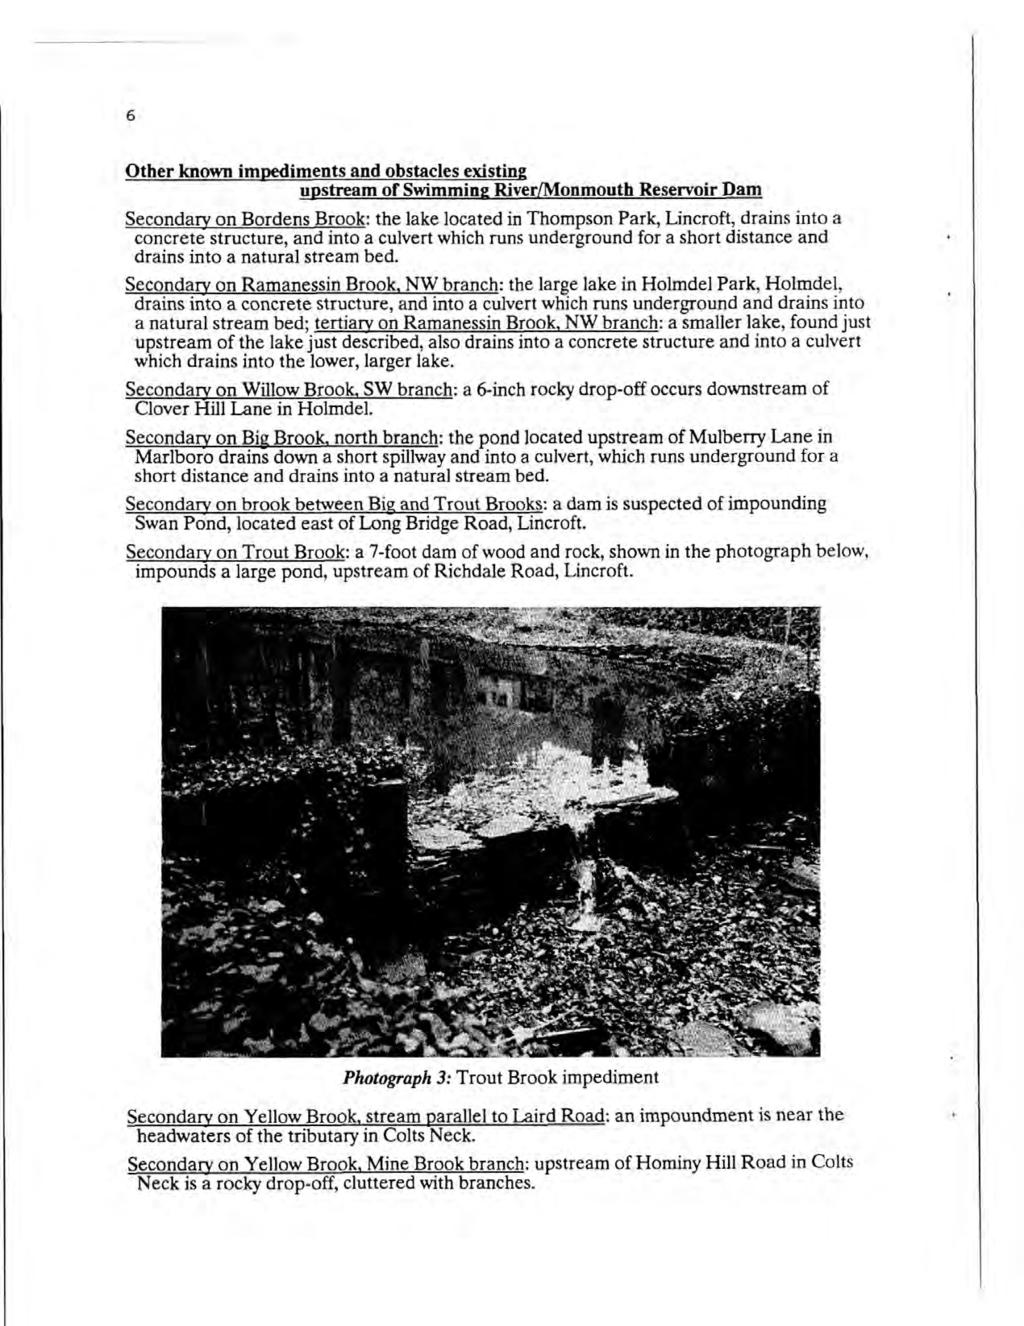 6 Other known impediments and obstacles existing upstream of Swimming River/Monmouth Reservoir Dam Secondary on Bordens Brook: the lake located in Thompson Park, Lincroft, drains into a concrete